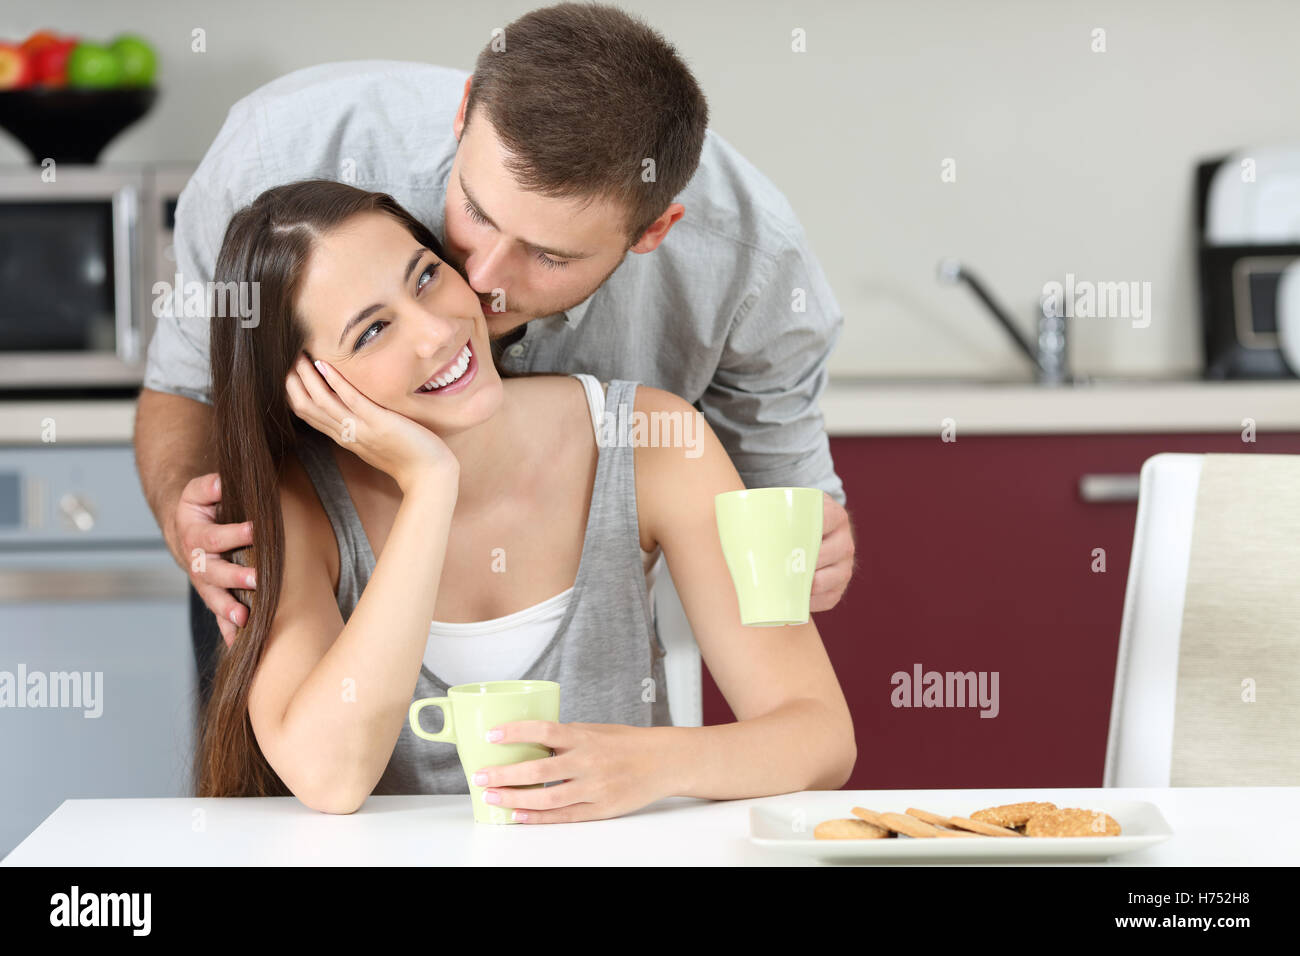 Roommates Breakfast High Resolution Stock Photography and Images - Alamy